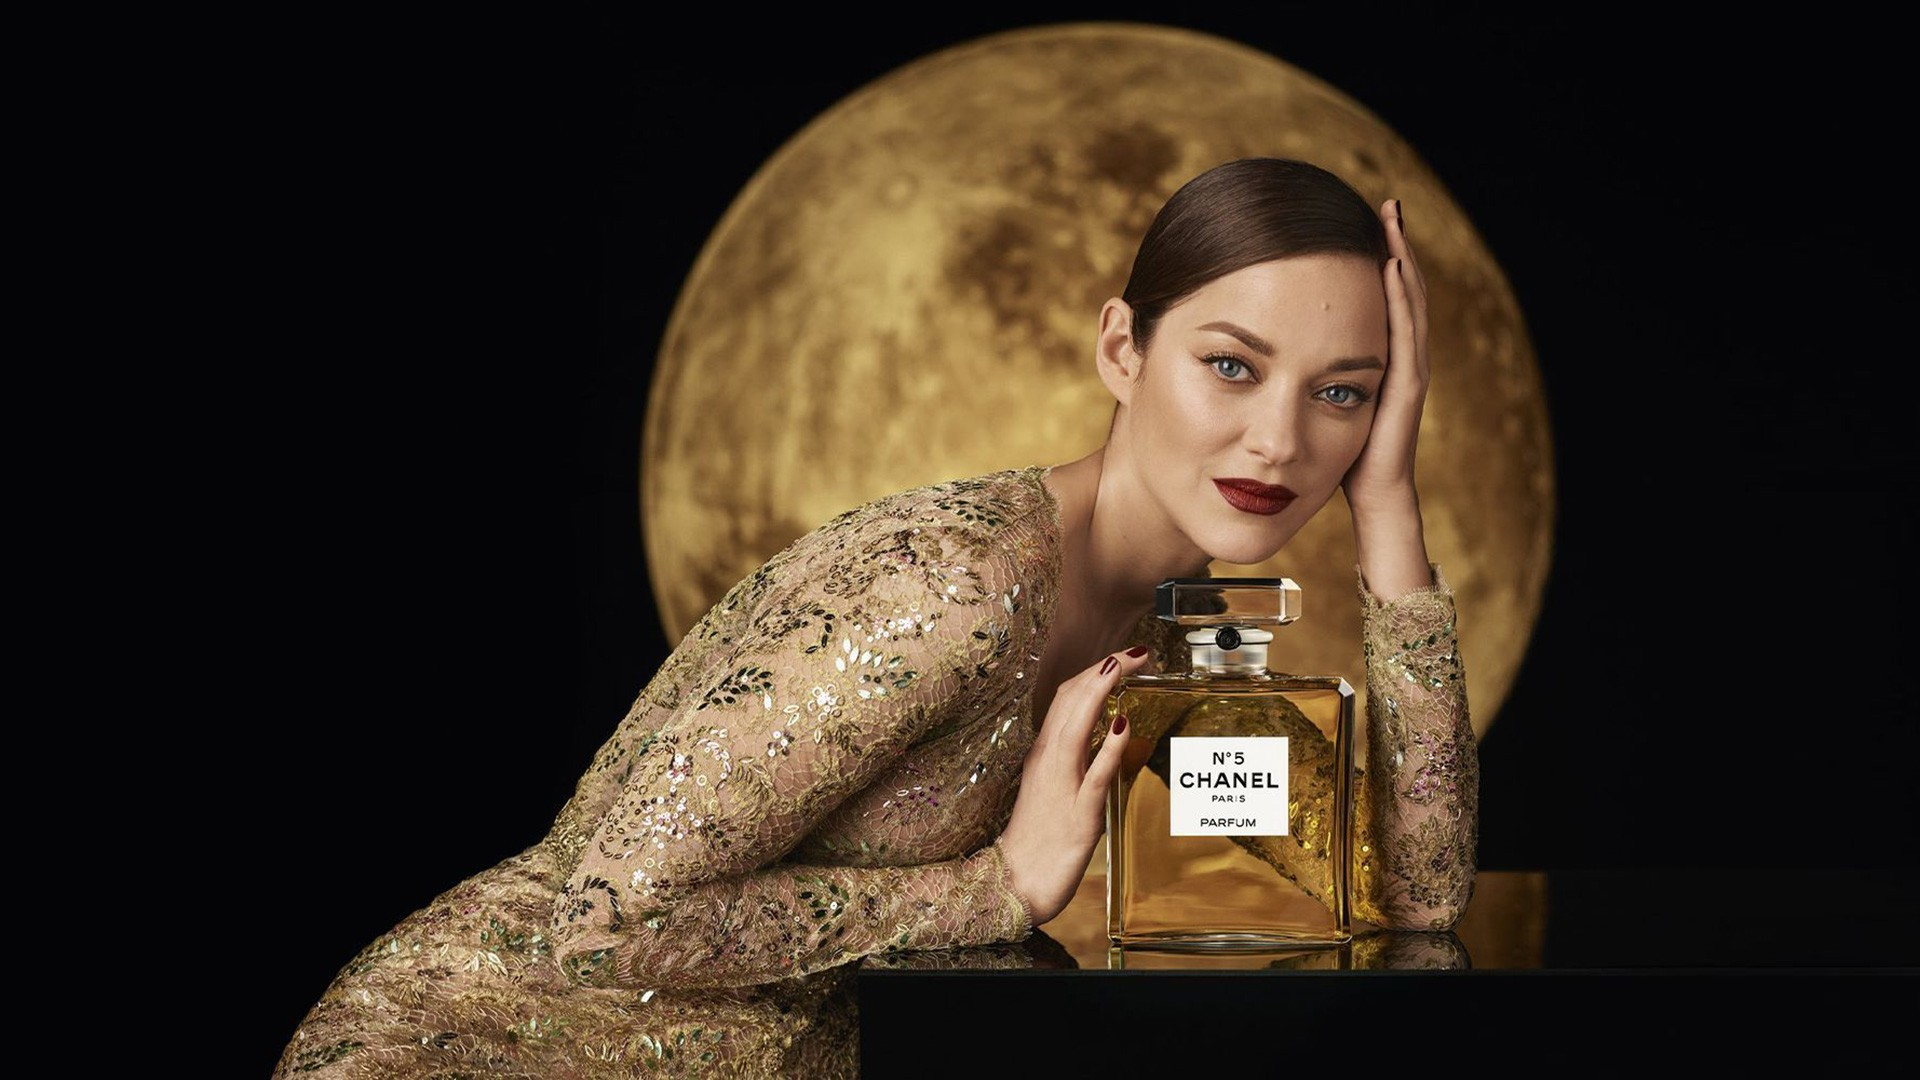 Marion Cotillard CHANEL N°5 Limited Editions